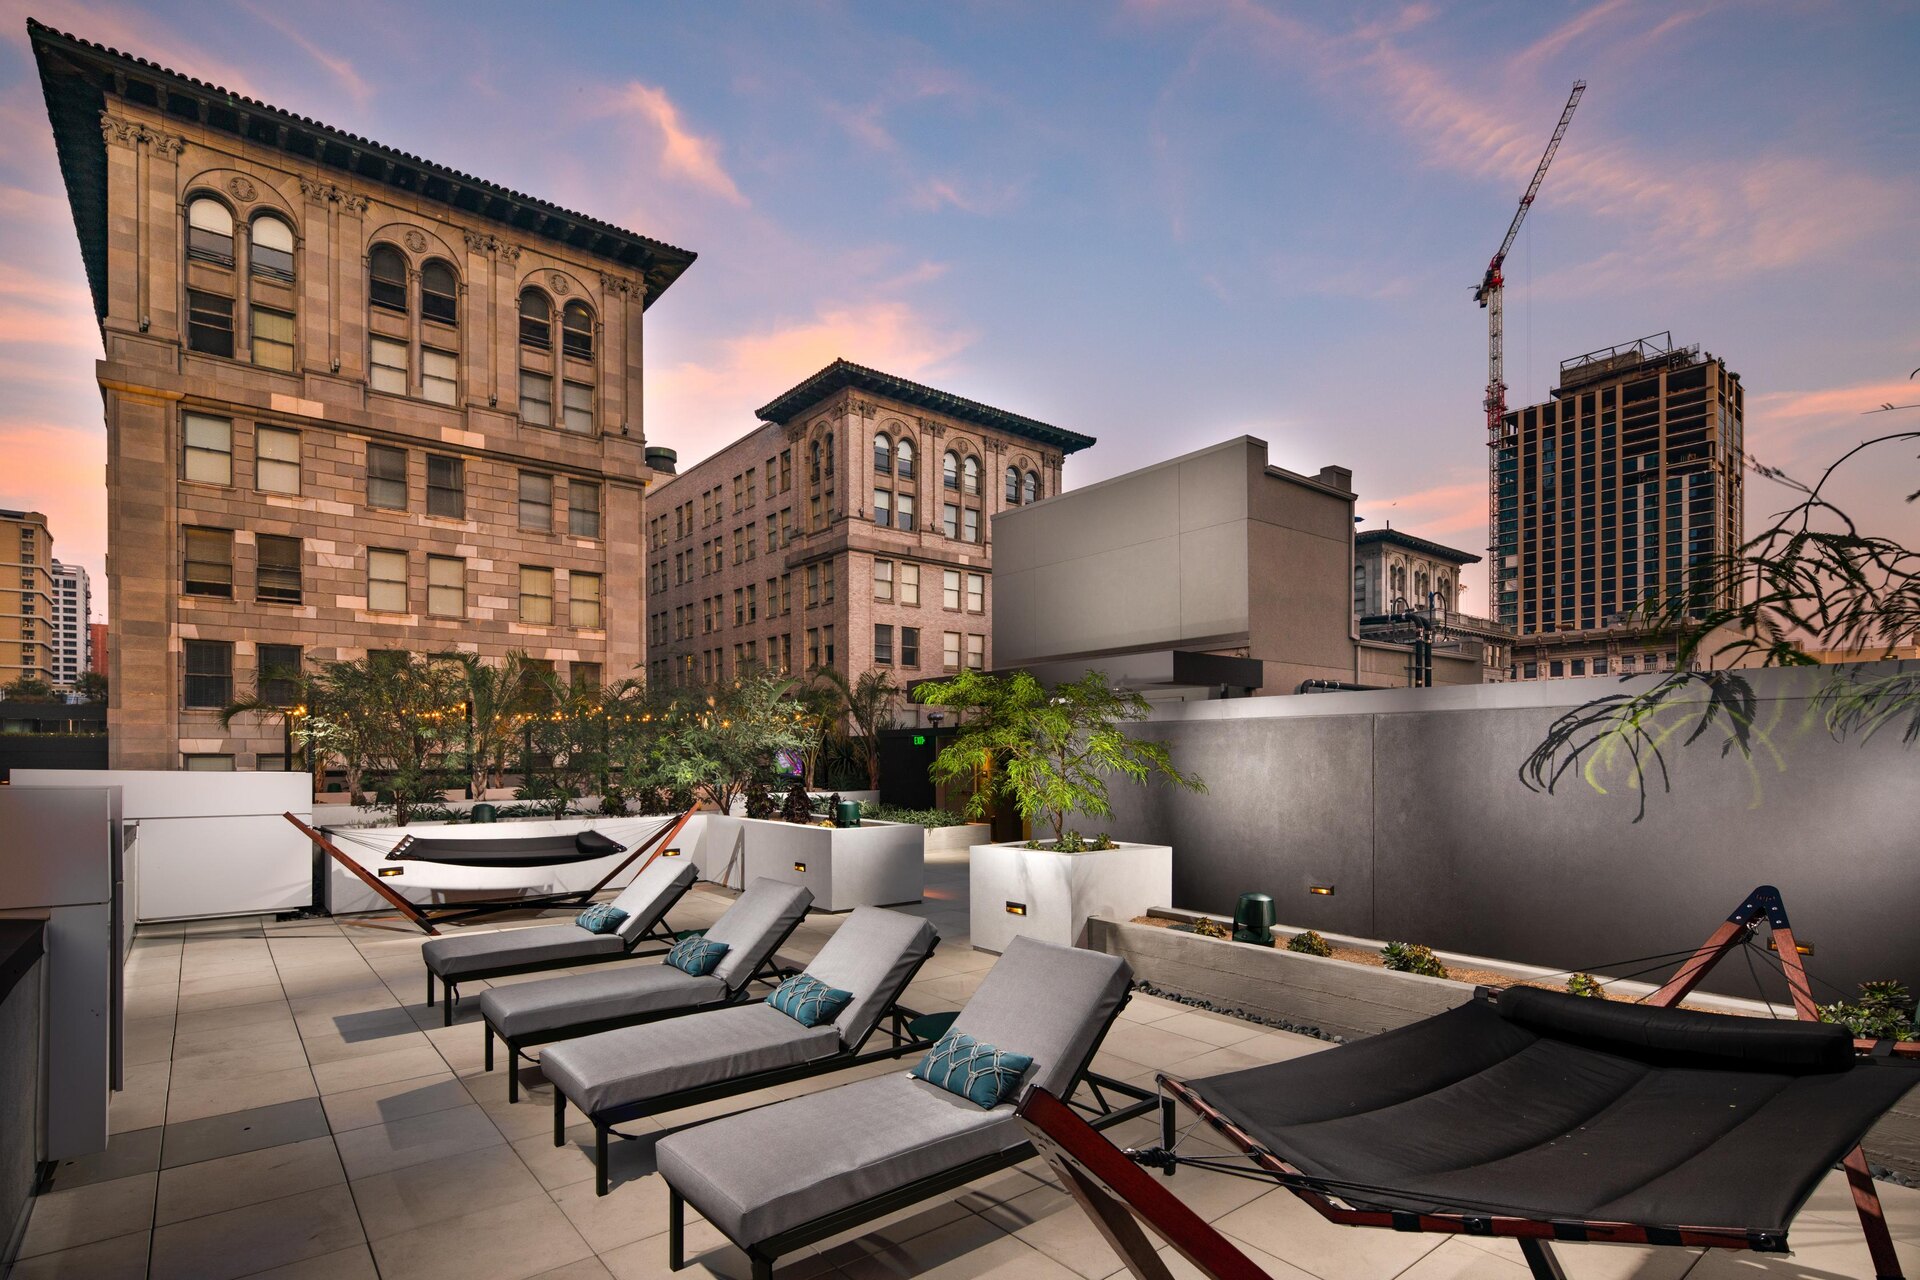 Rooftop sundeck with hammocks and lounge chairs